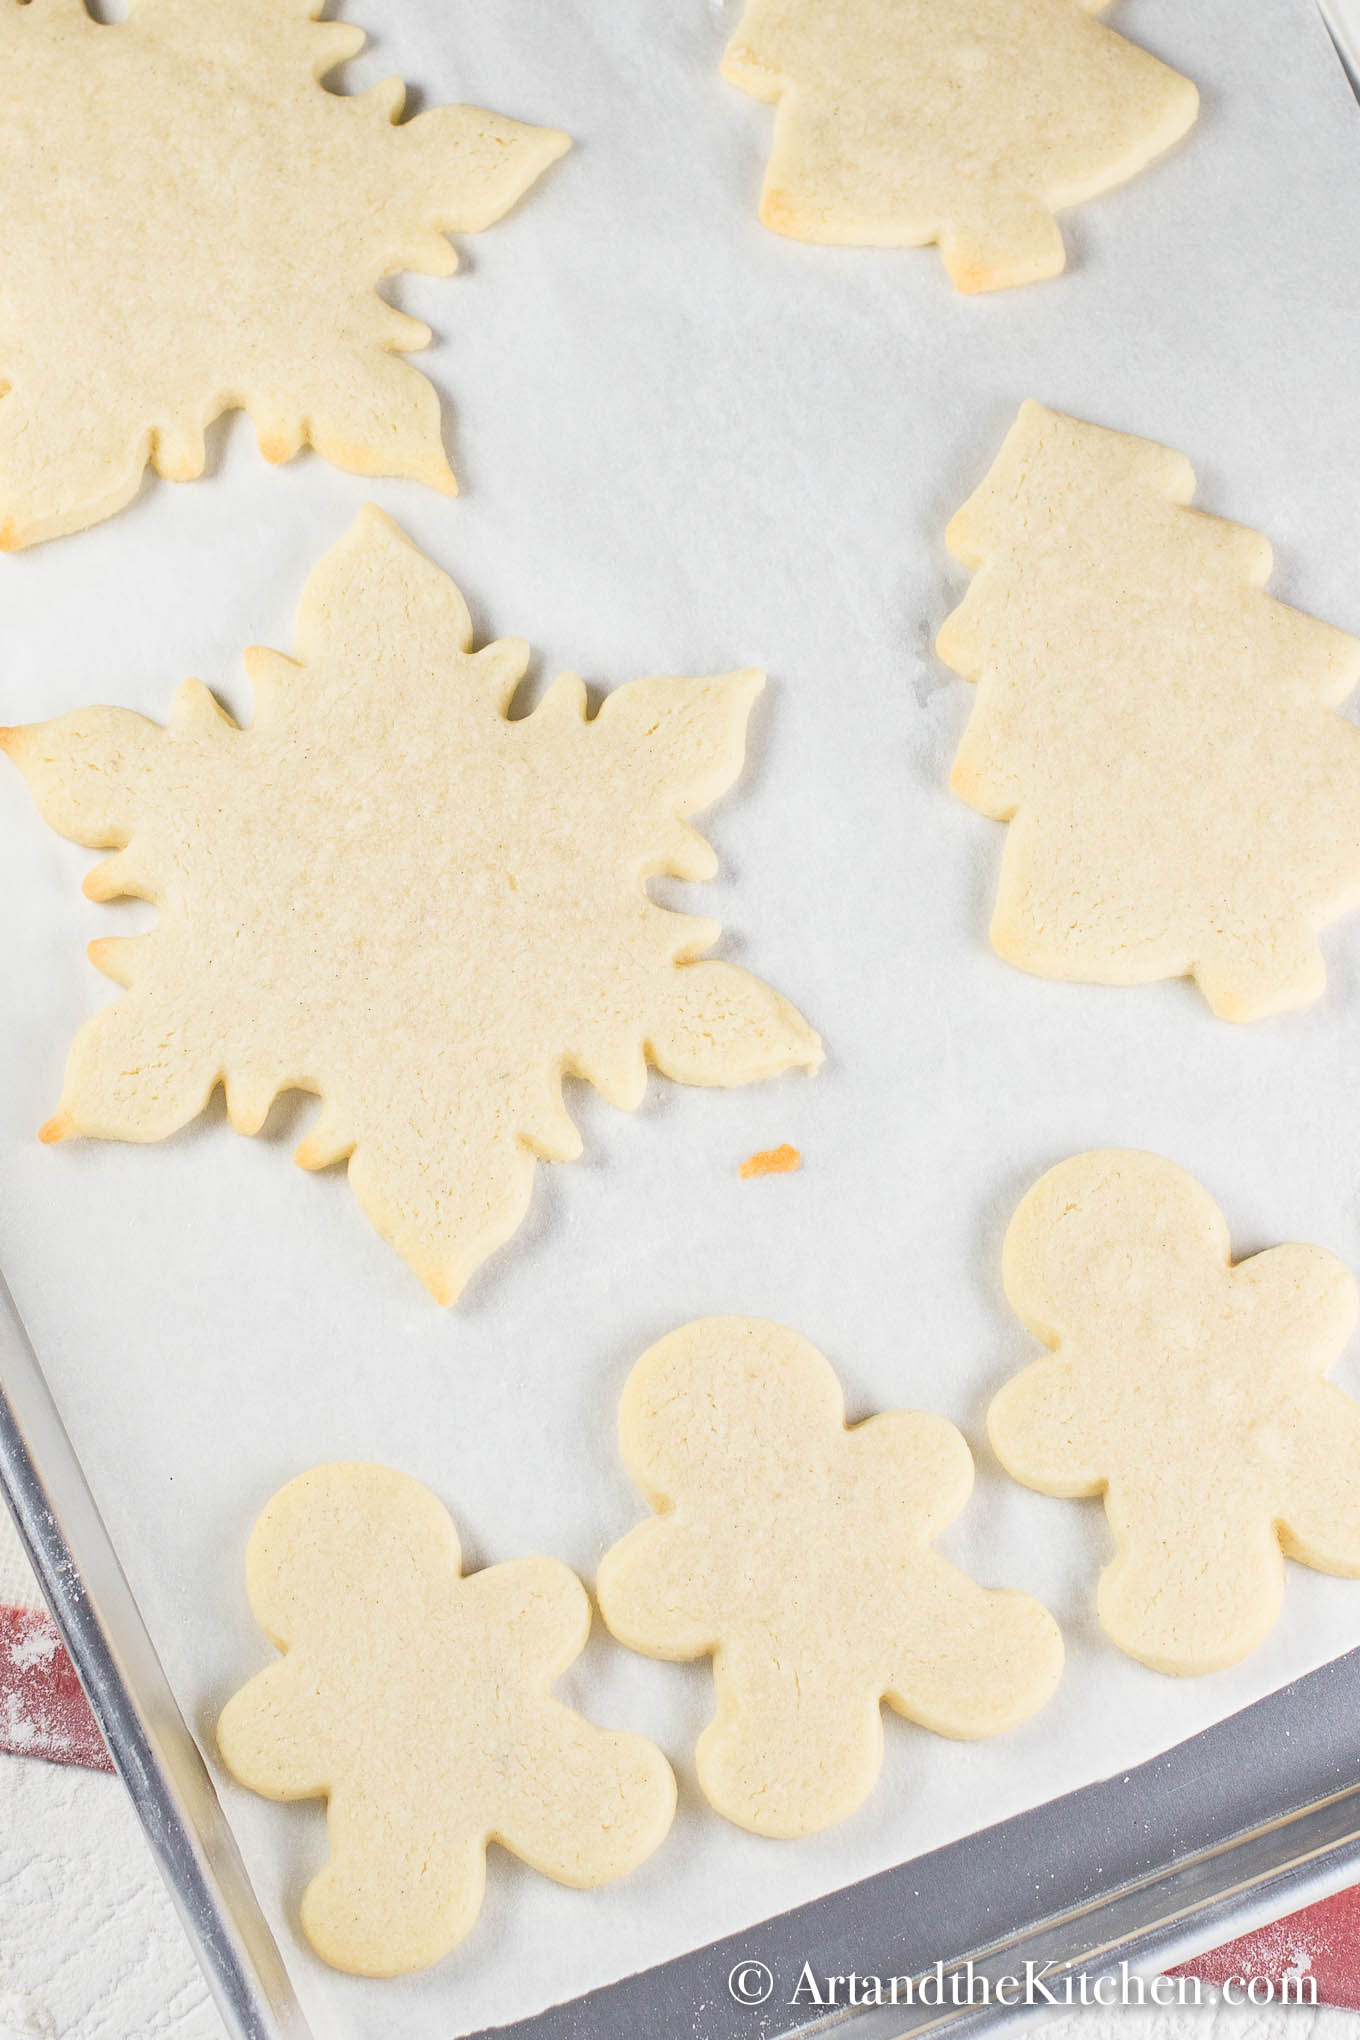 White parchment line baking pan filled with holiday shaped baked cookies.